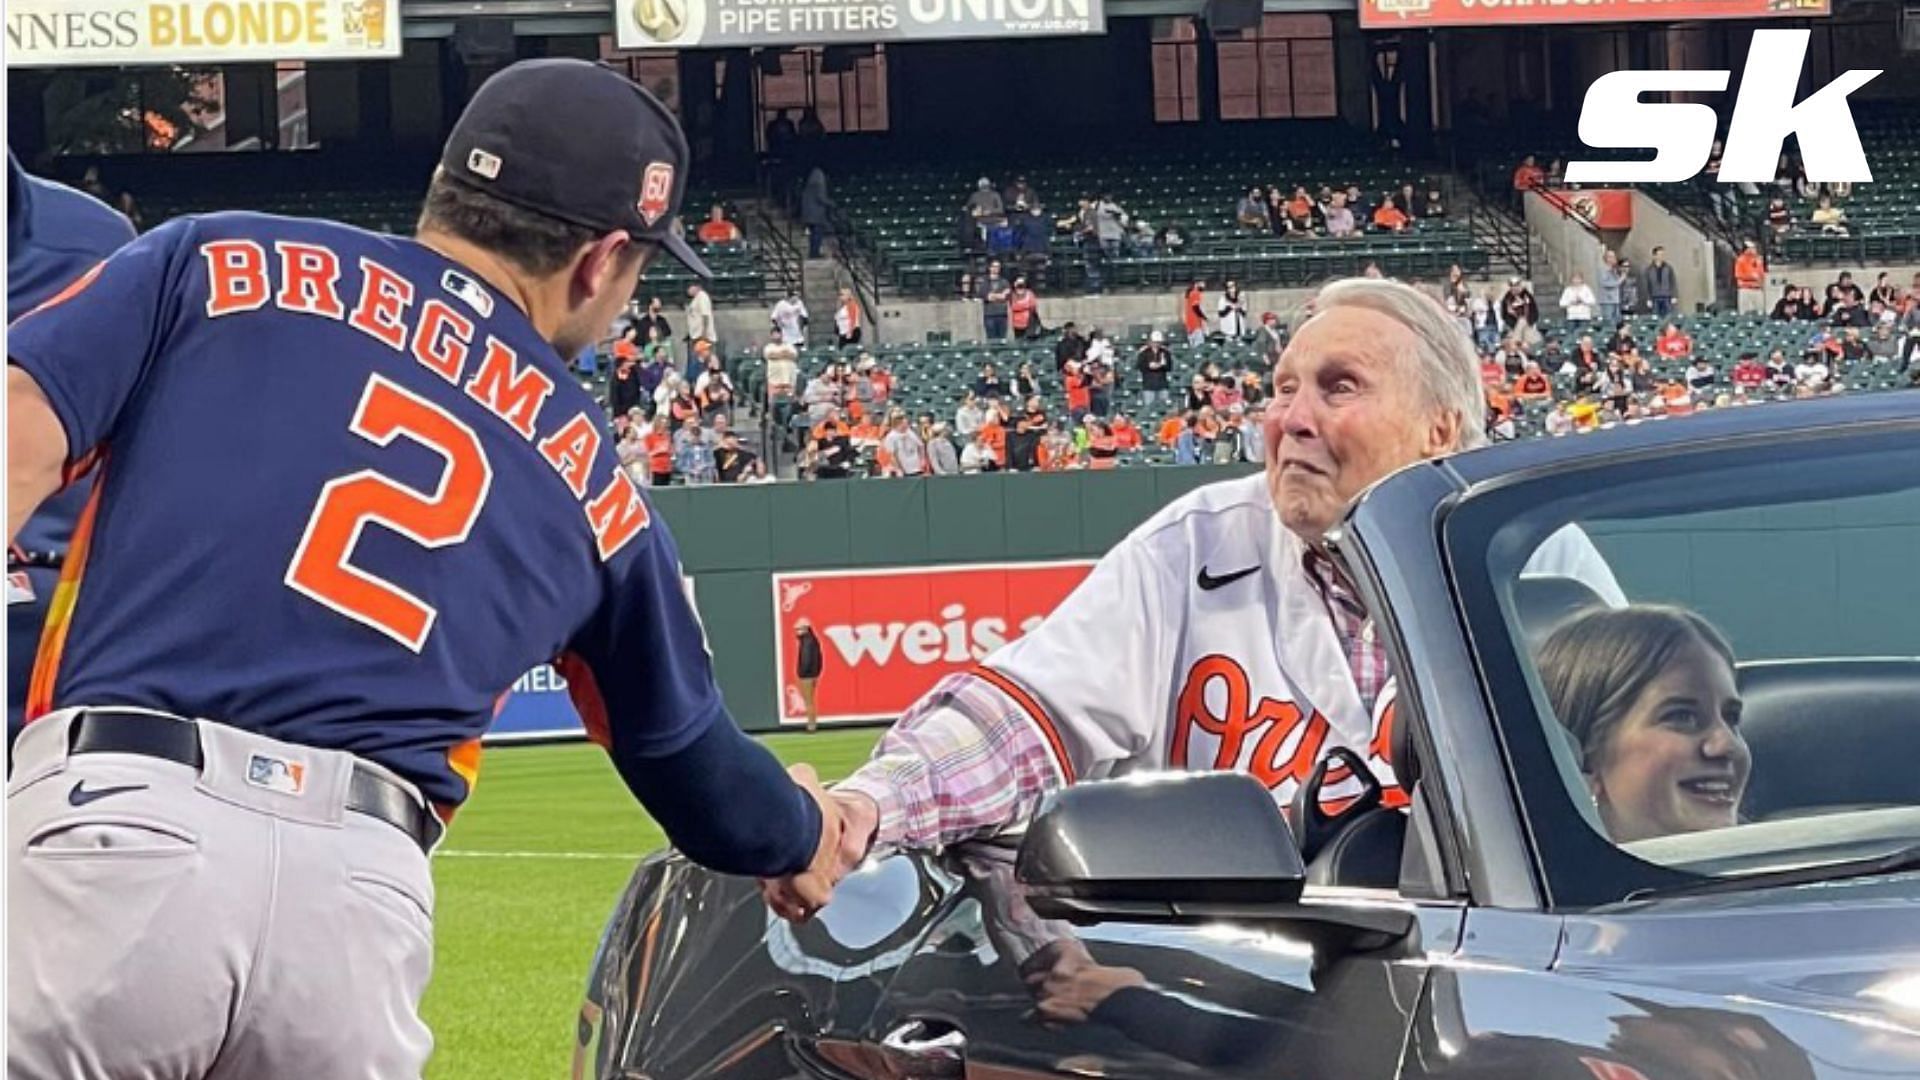 Alex Bregman met with HOFer Brooks Robinson at the Oriole Park on Saturday